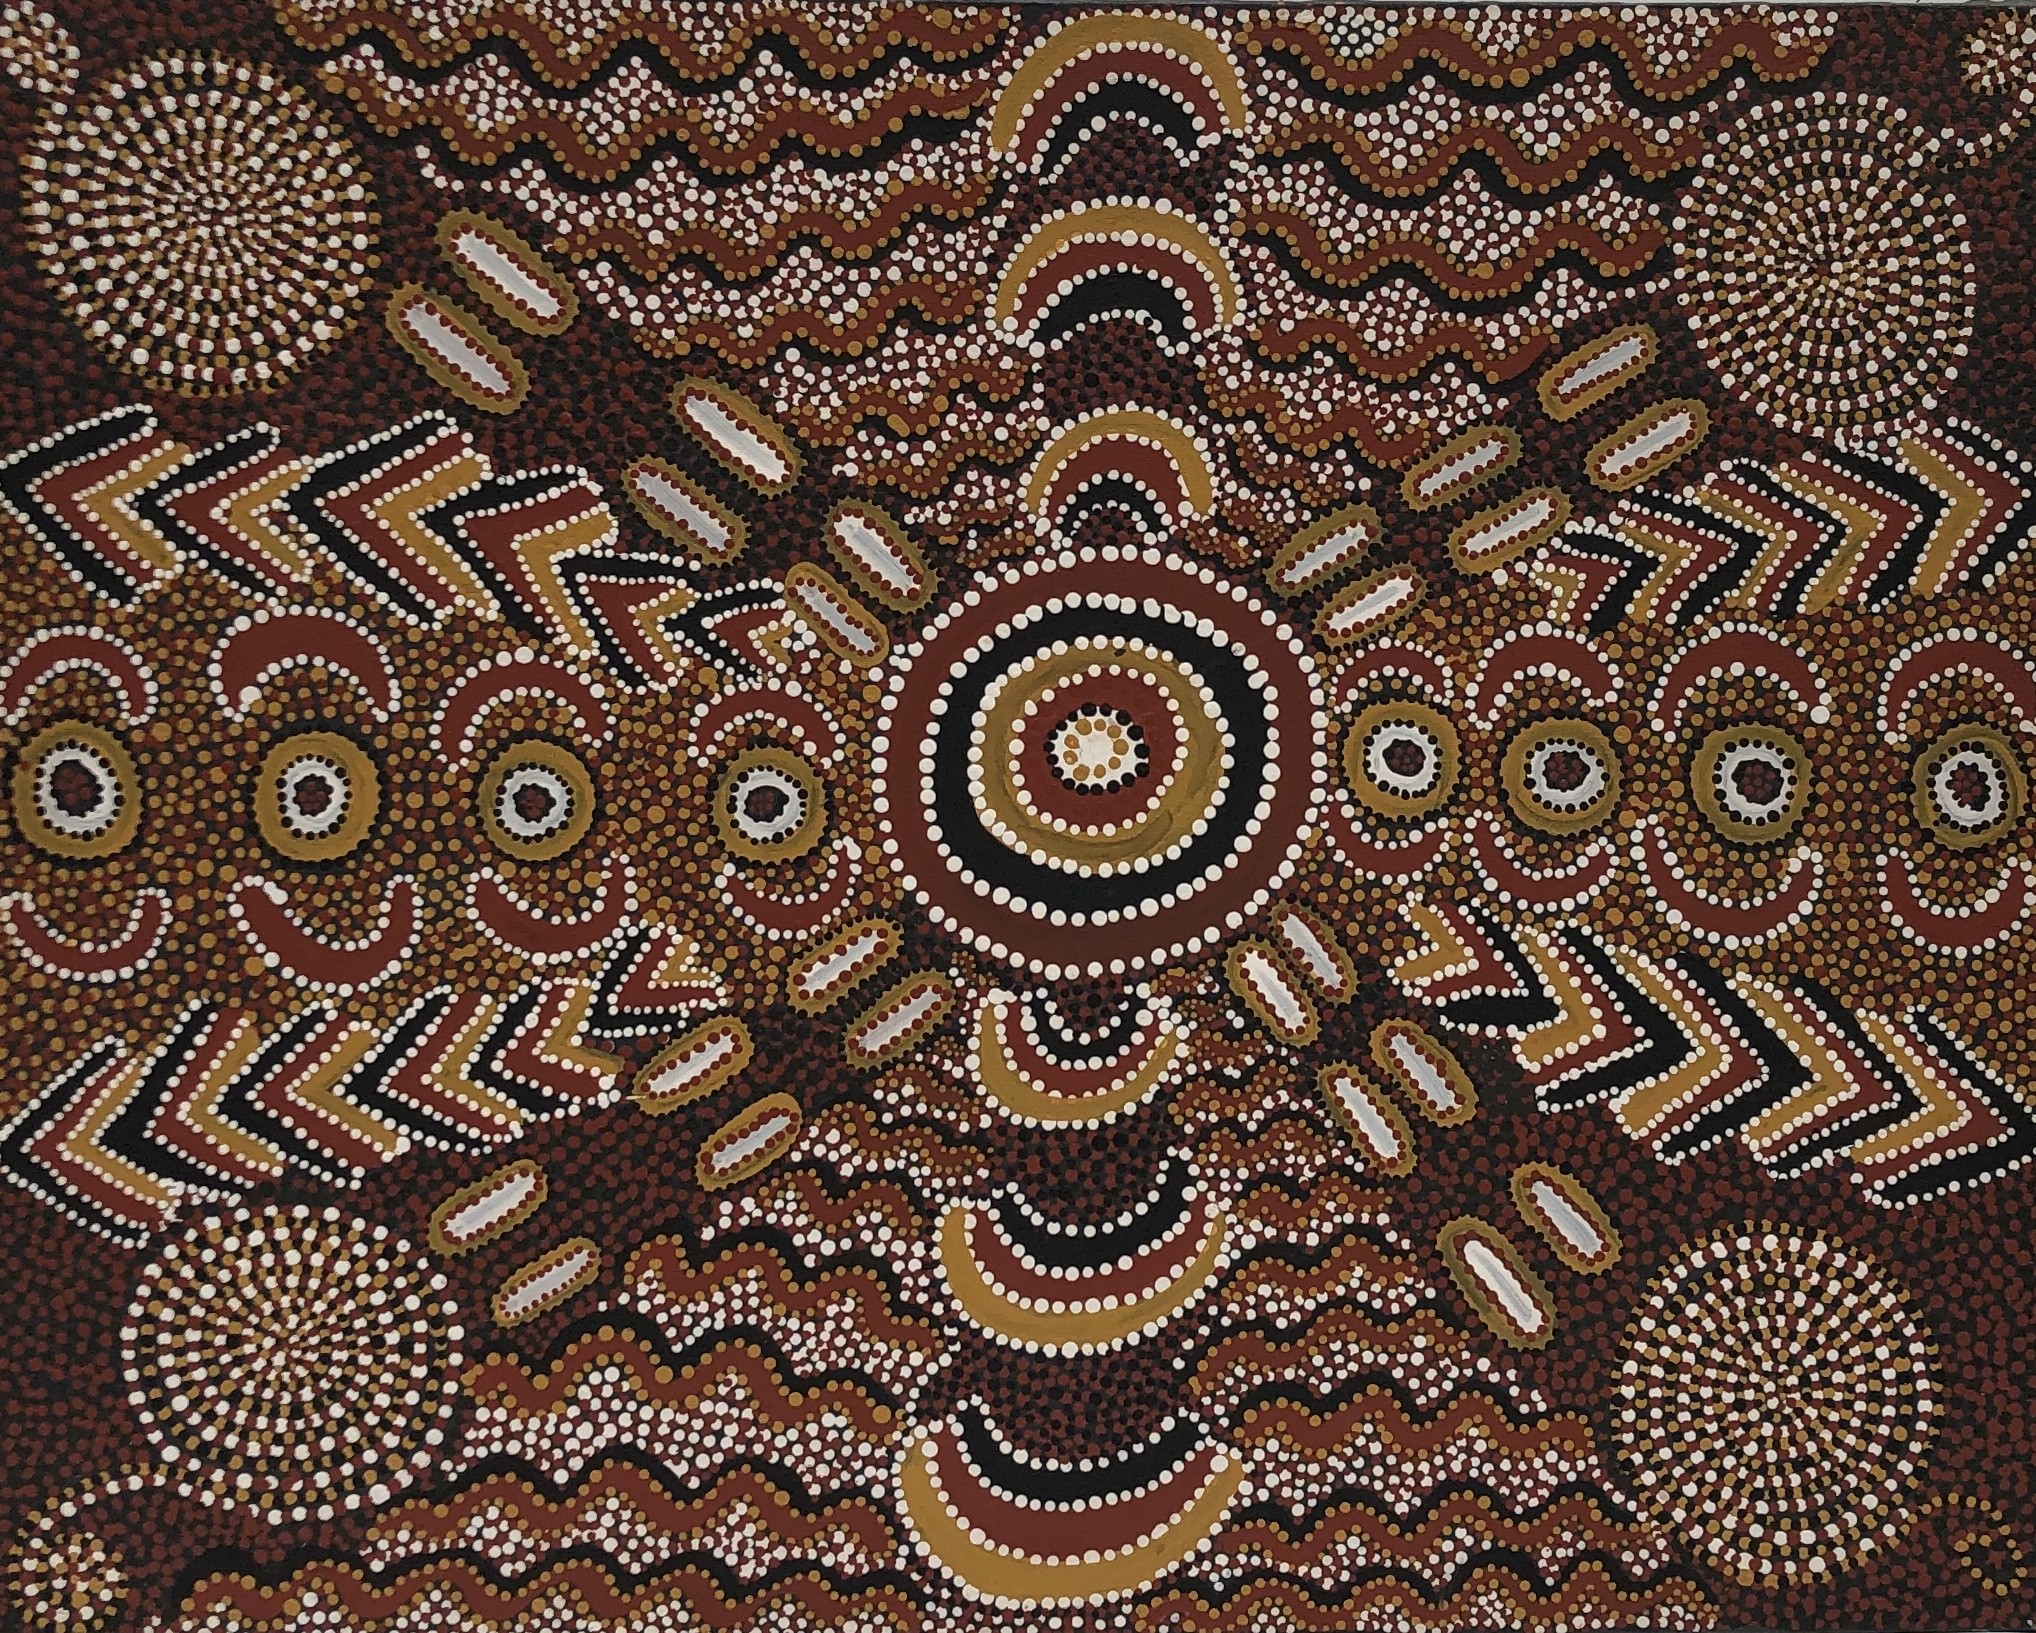 Untitled Aboriginal Dot Painting By Margaret Turner Petyarre The Mccorry Collection